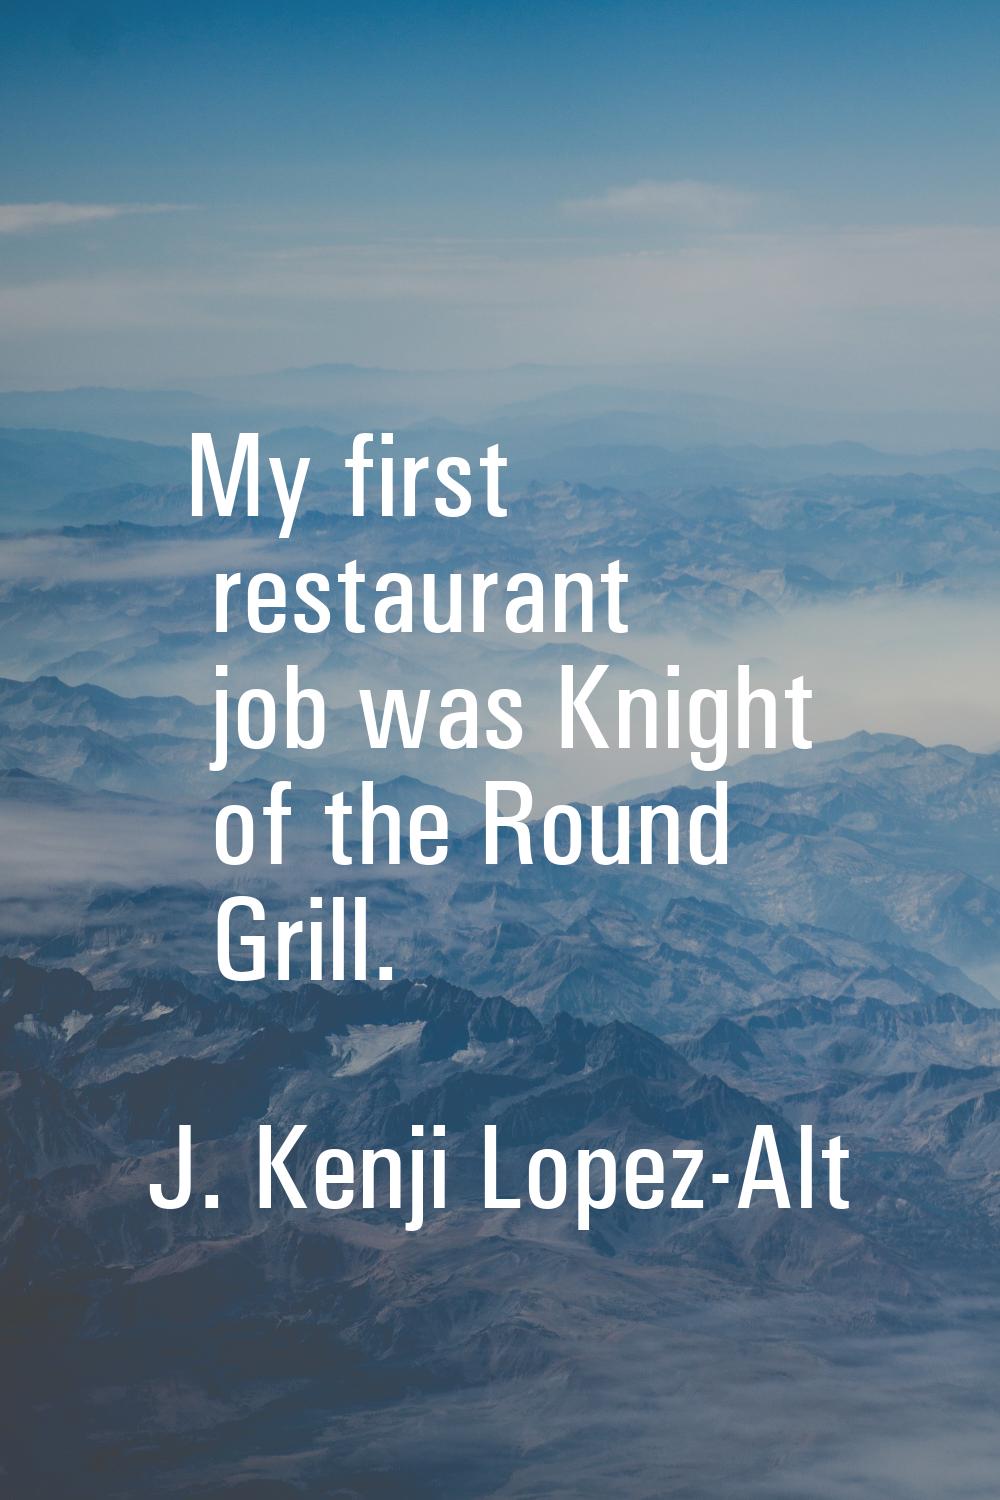 My first restaurant job was Knight of the Round Grill.